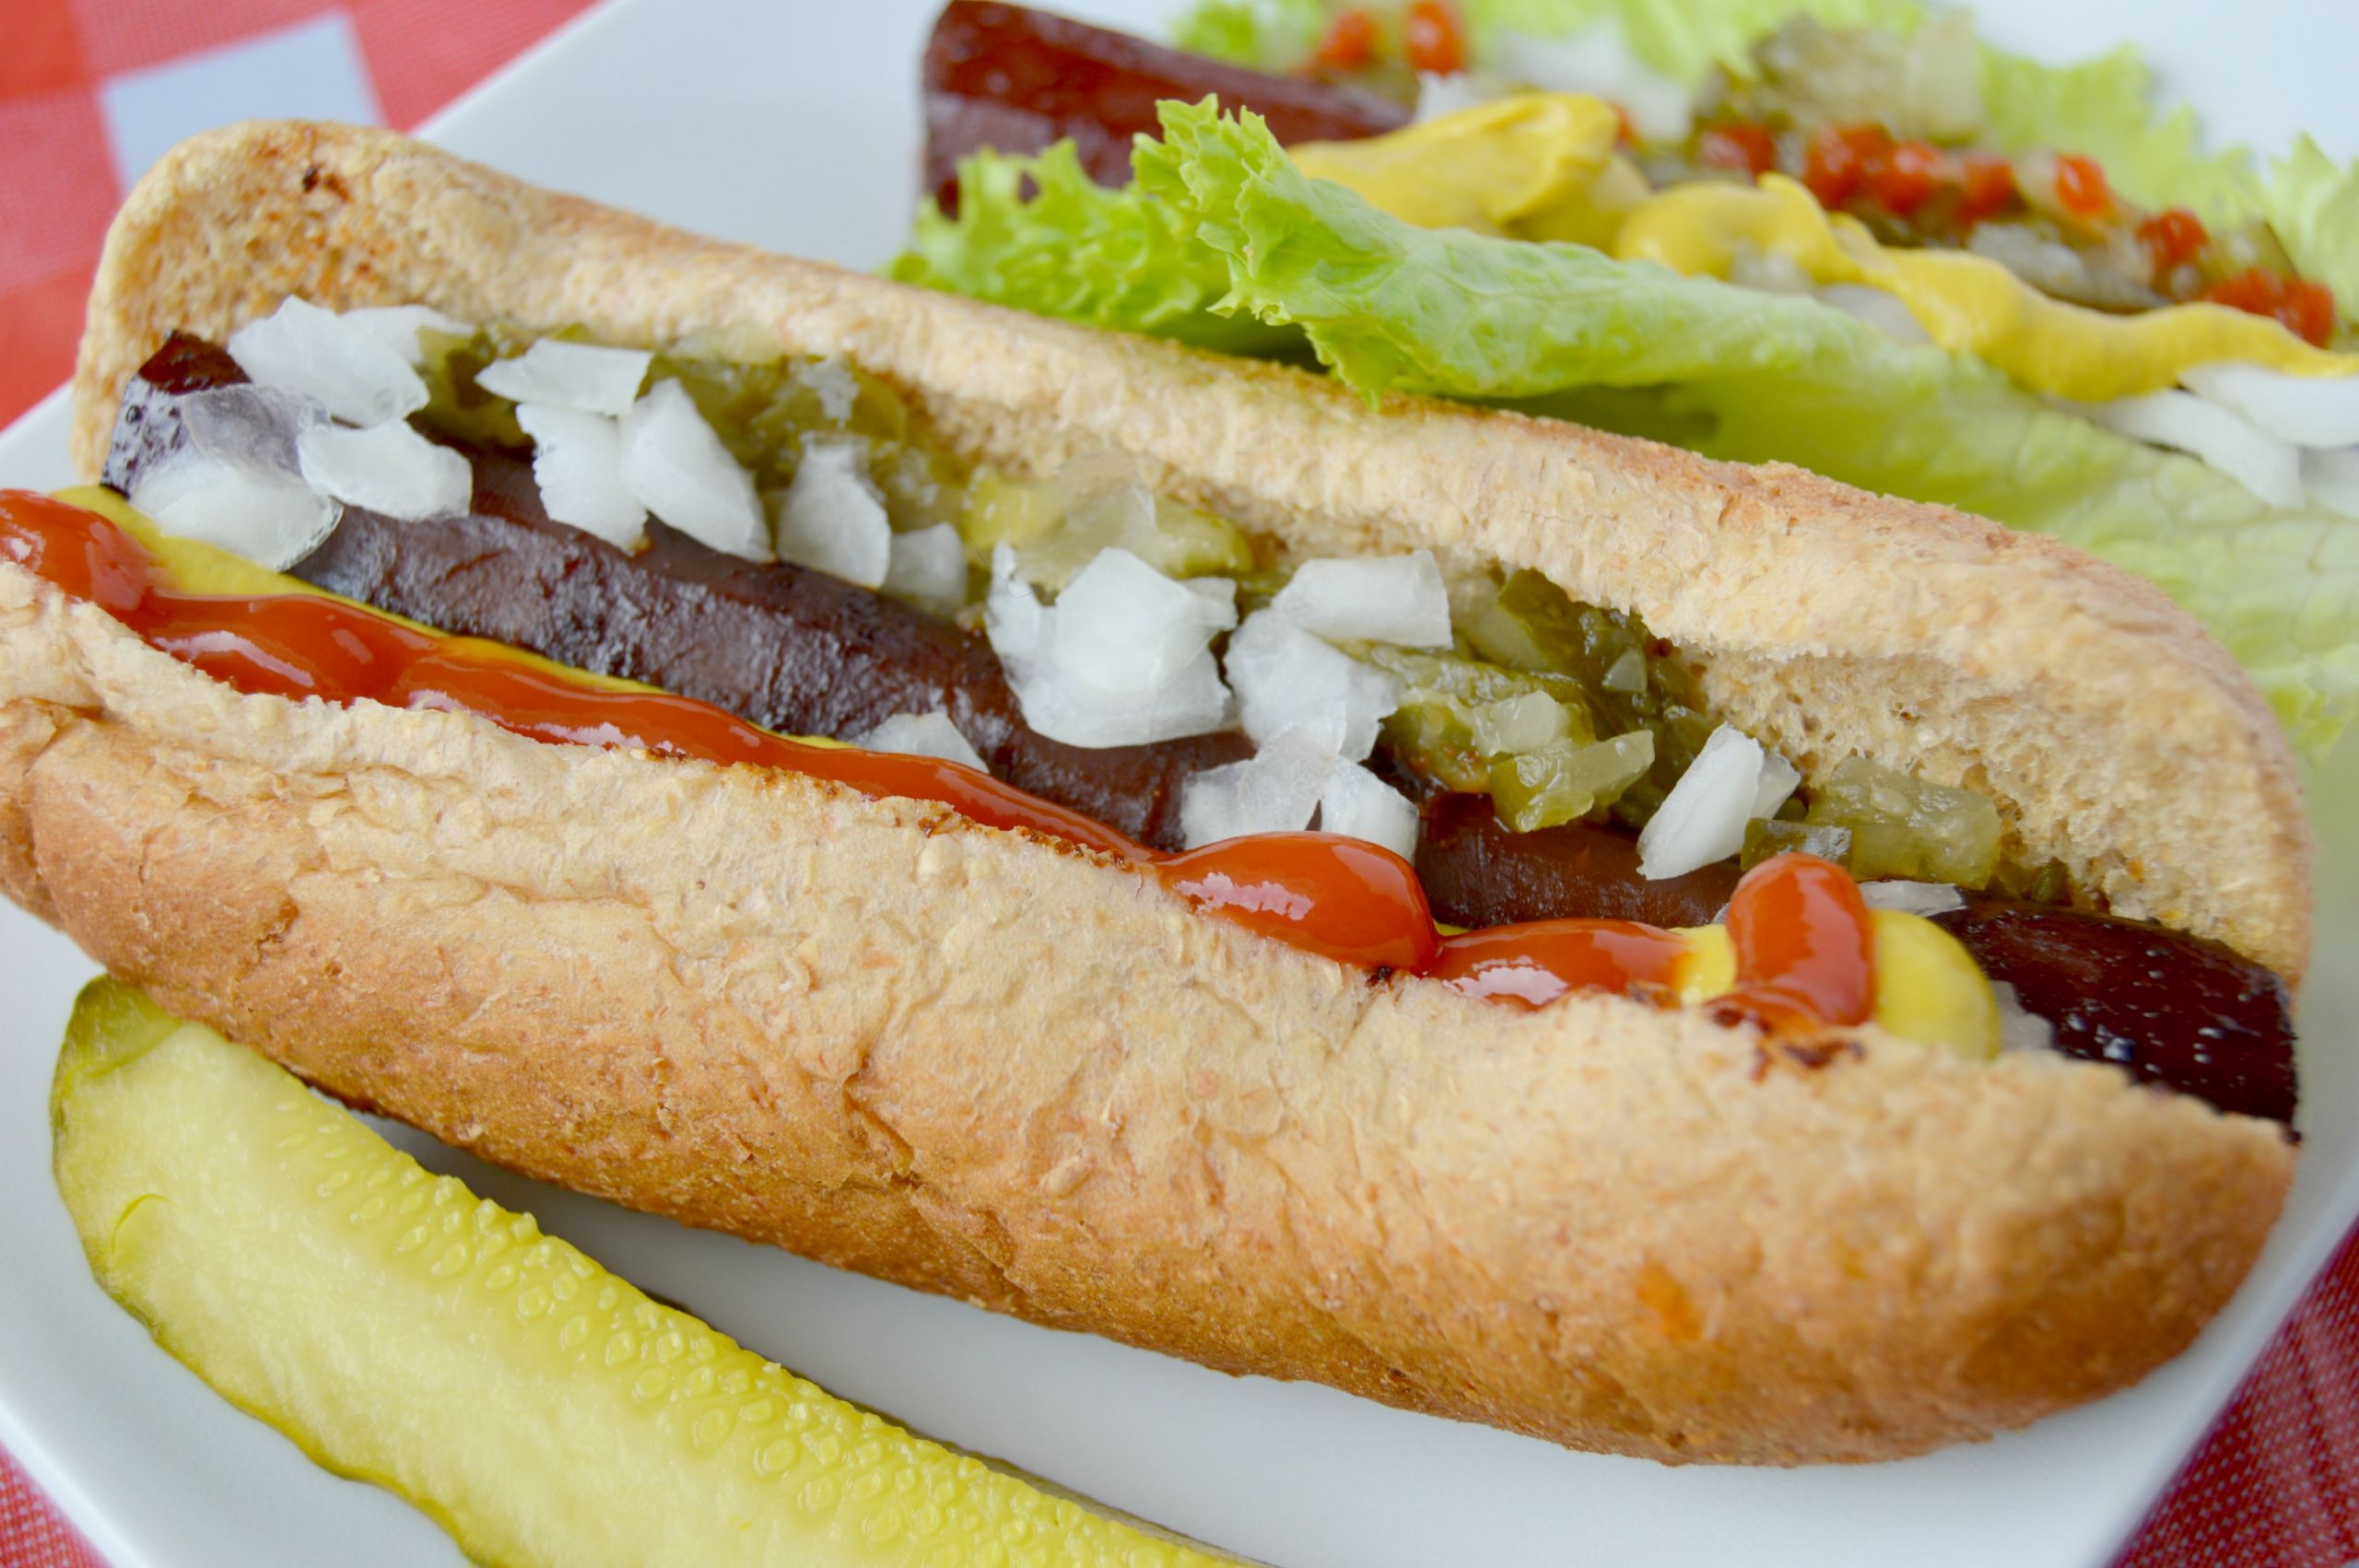 30 Ideas for Best Vegan Hot Dogs Home, Family, Style and Art Ideas